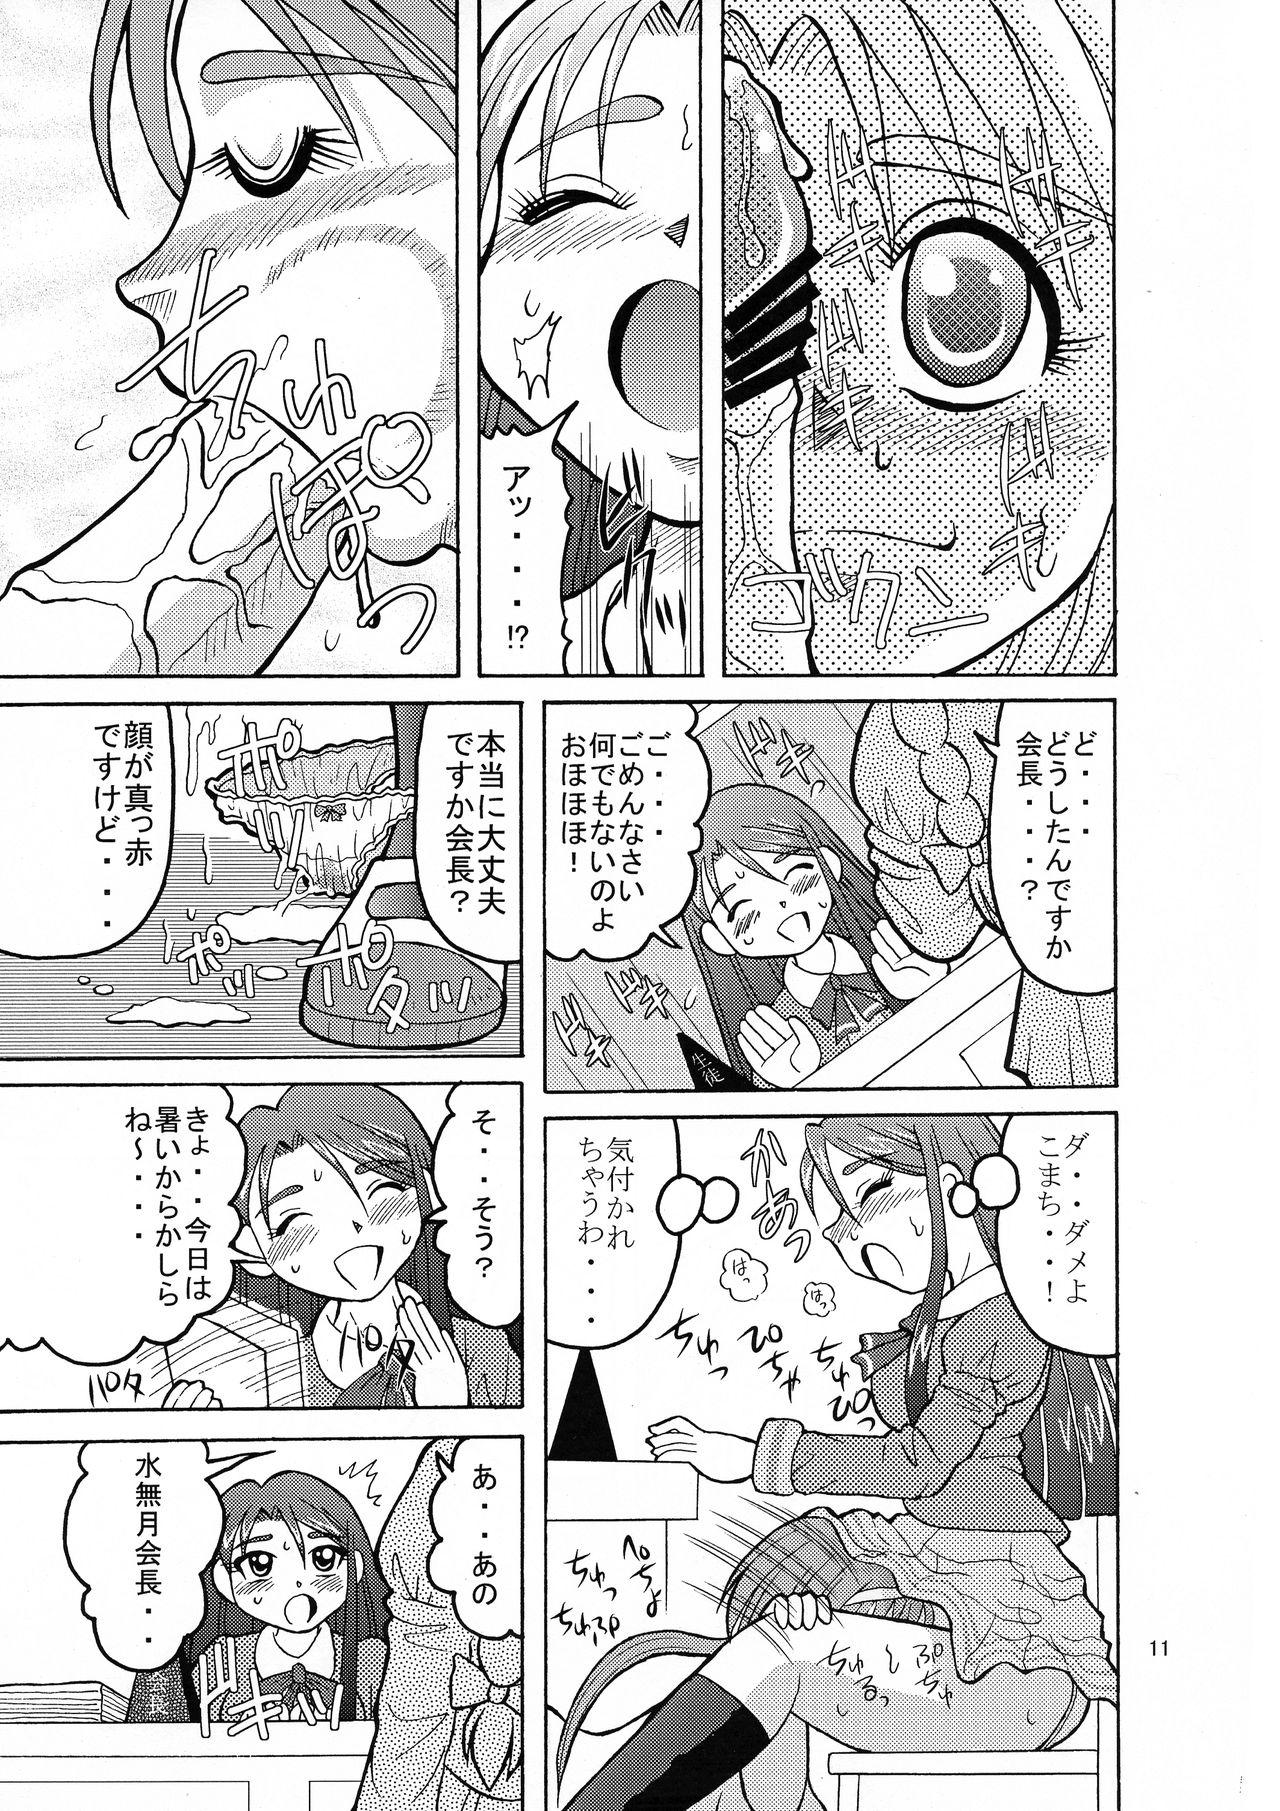 Gay Averagedick Komakare GO! GO! - Yes precure 5 Penis - Page 11